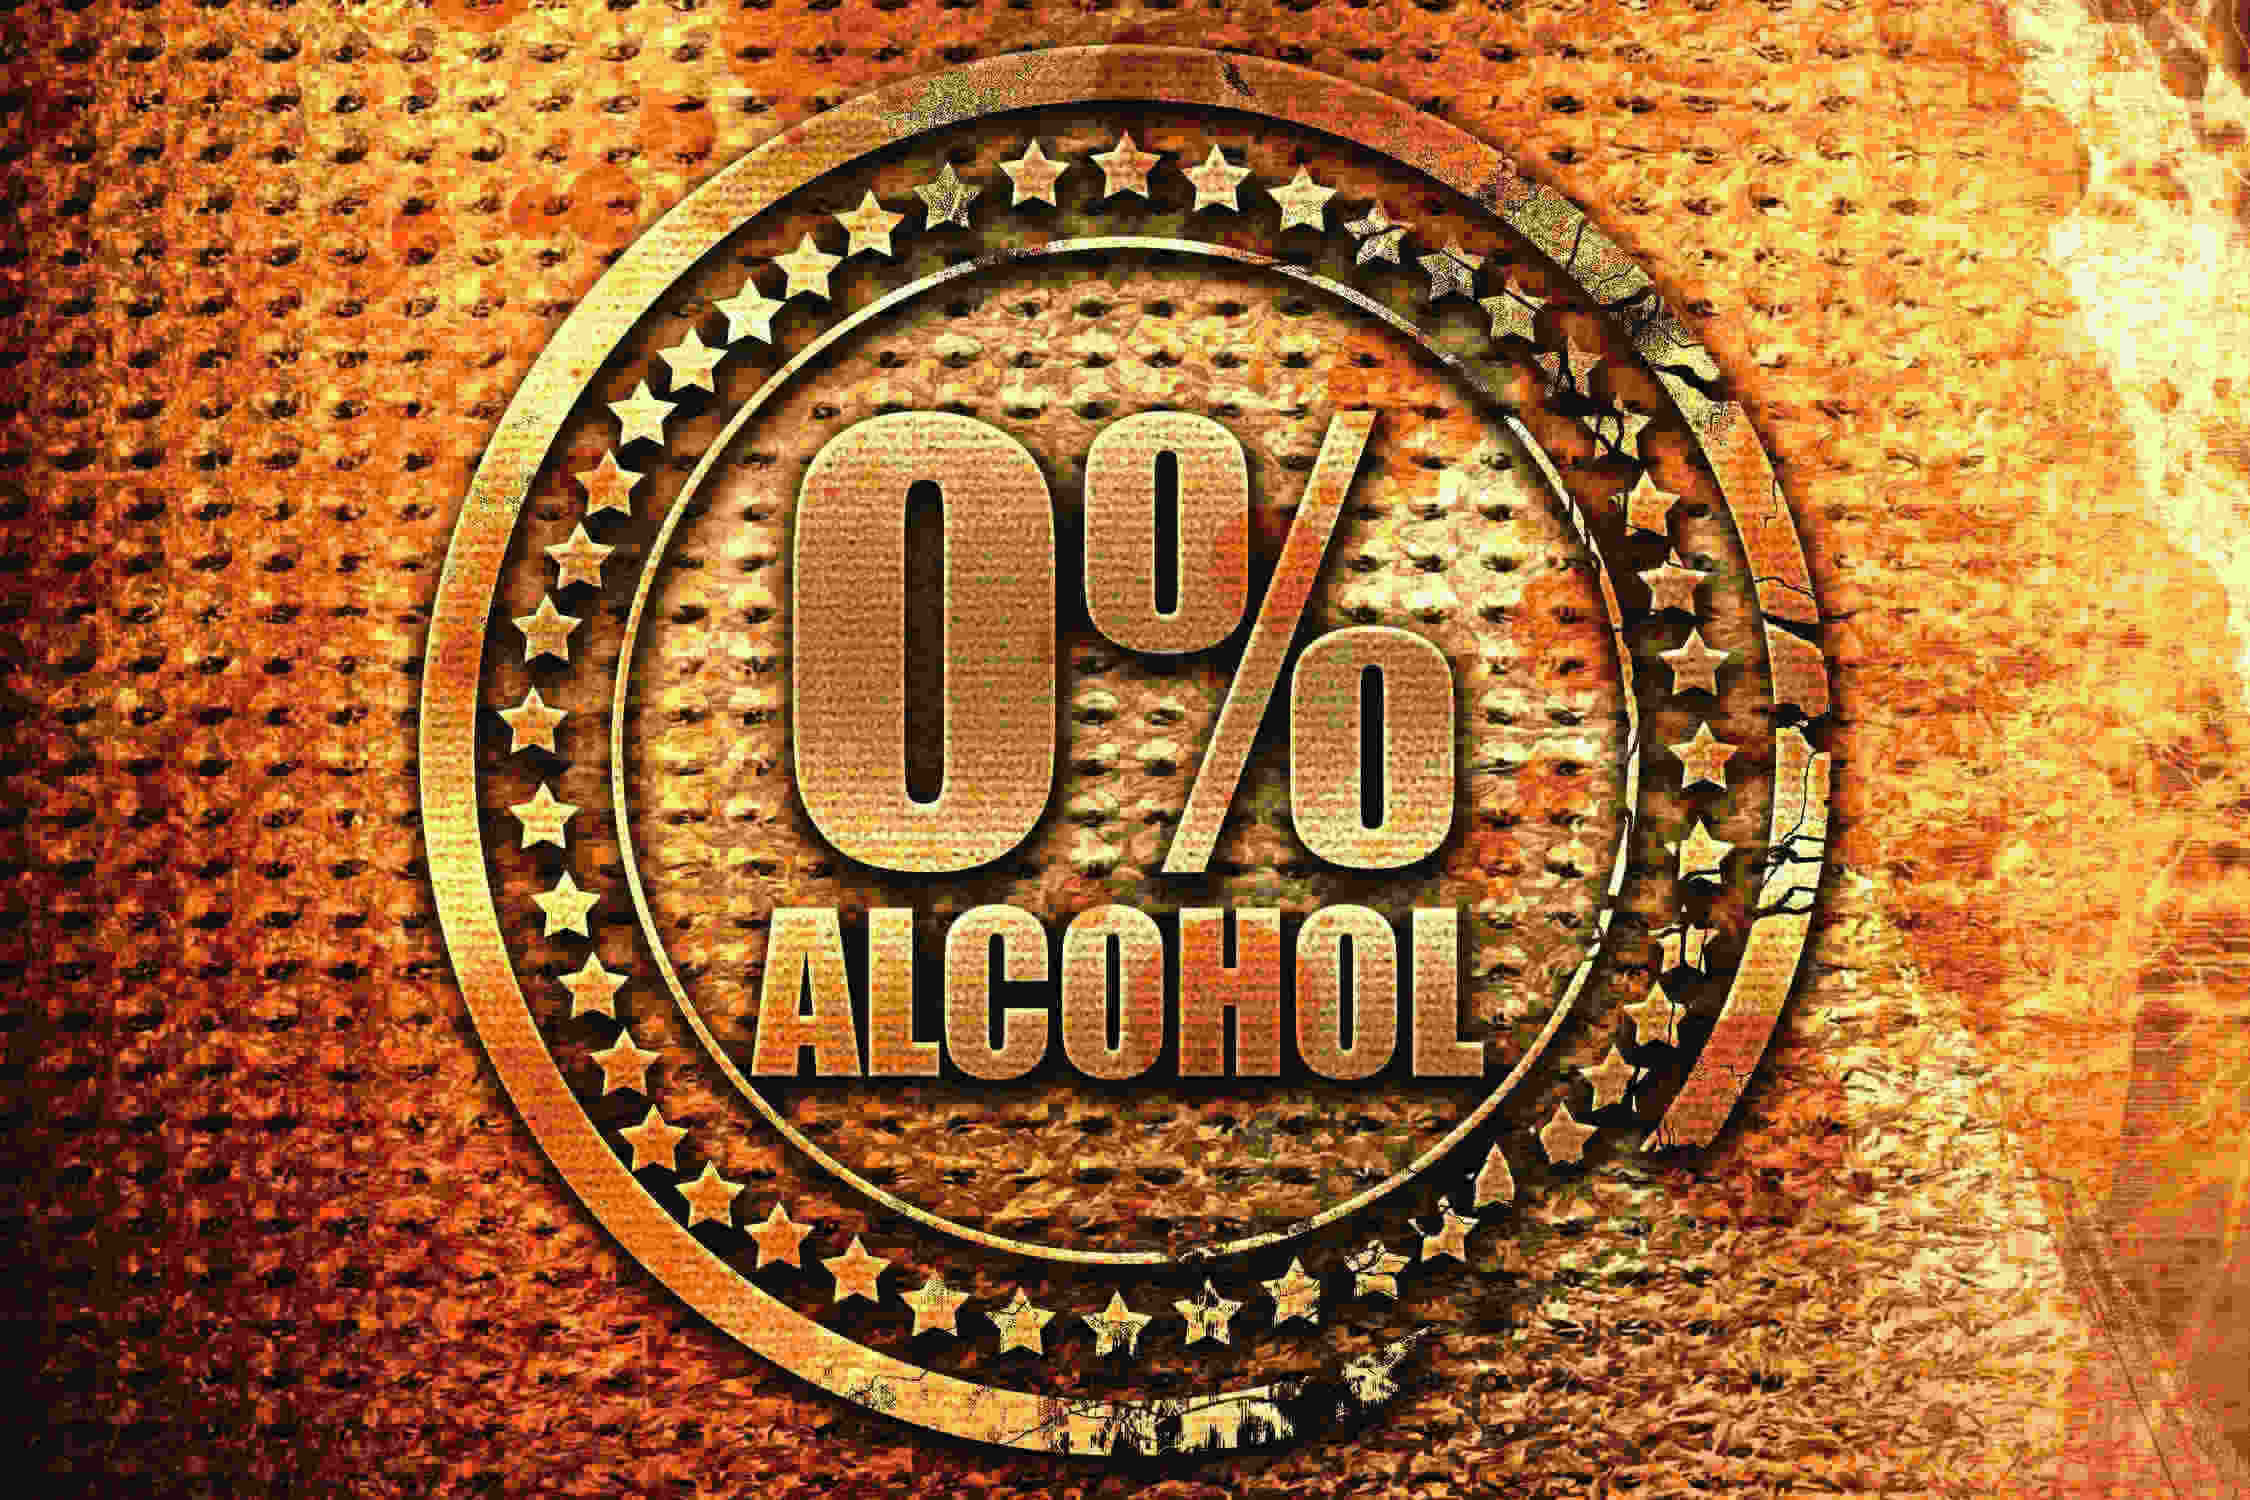 Recent research by Lyre's  non-alcoholic spirits brand found that 42% of the Irish population now drink less alcohol than they did five years ago, with 51% of that cohort having reduced their alcohol consumption due to a desire to lead a healthier lifestyle.